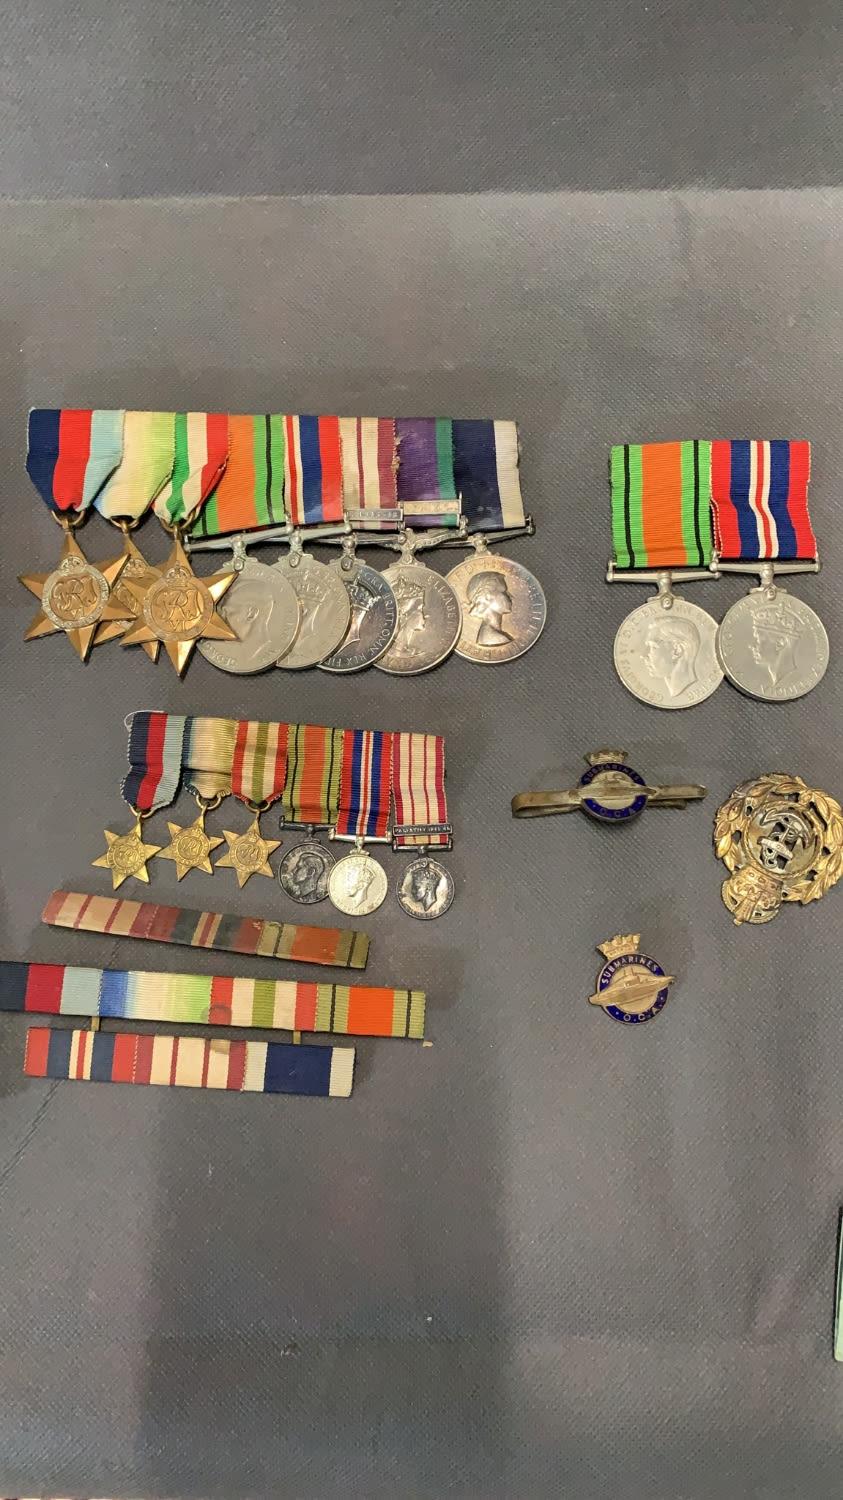 A collection of 16 medals, George V and Elizabeth 11, awarded to John C Parkinson. E.R.A.I Davenport